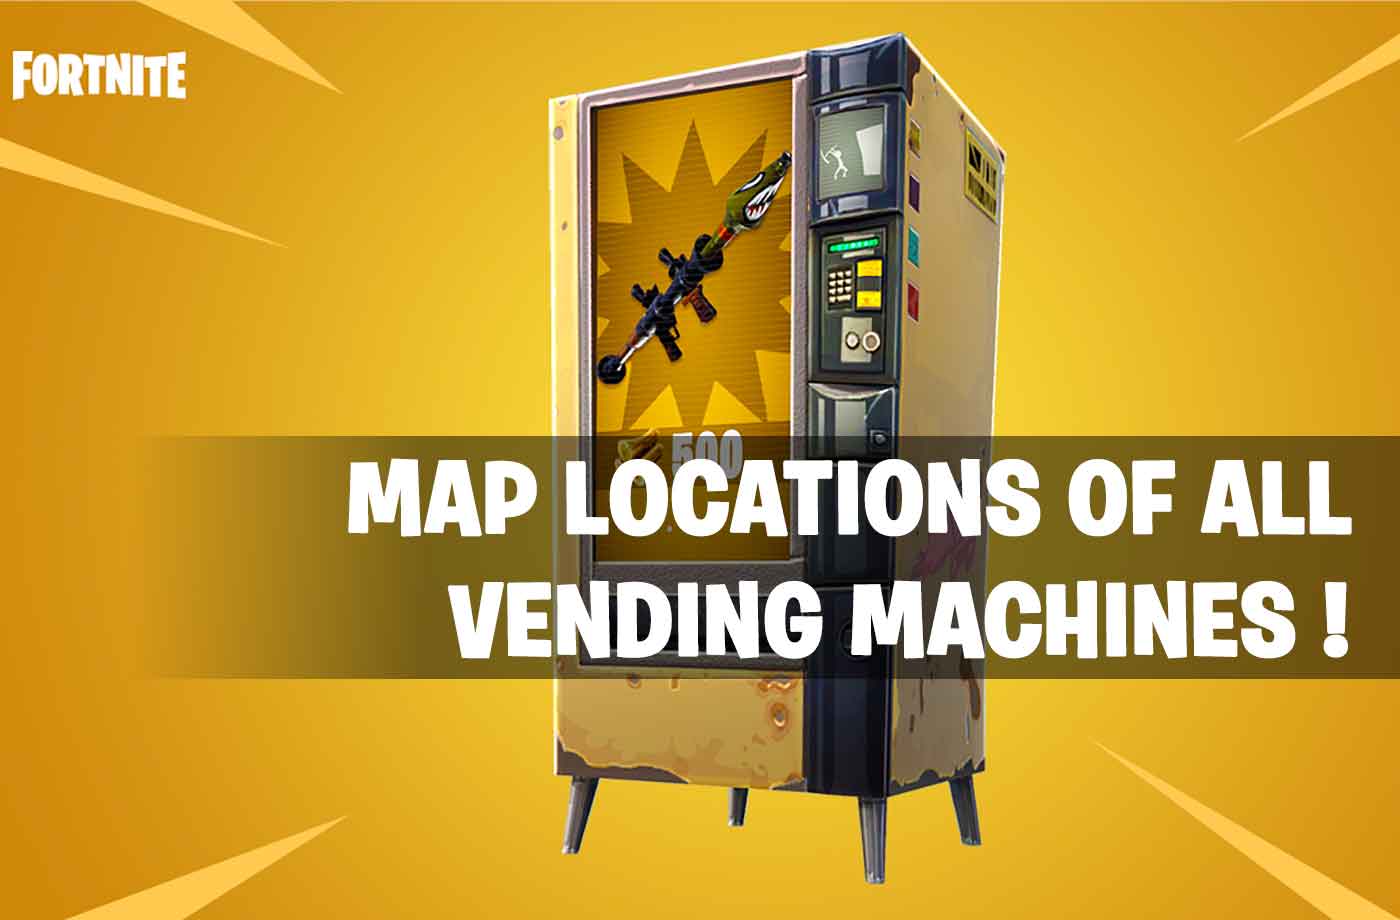 fortnite battle royale map locations of all vending machines - fortnite vending machine locations map